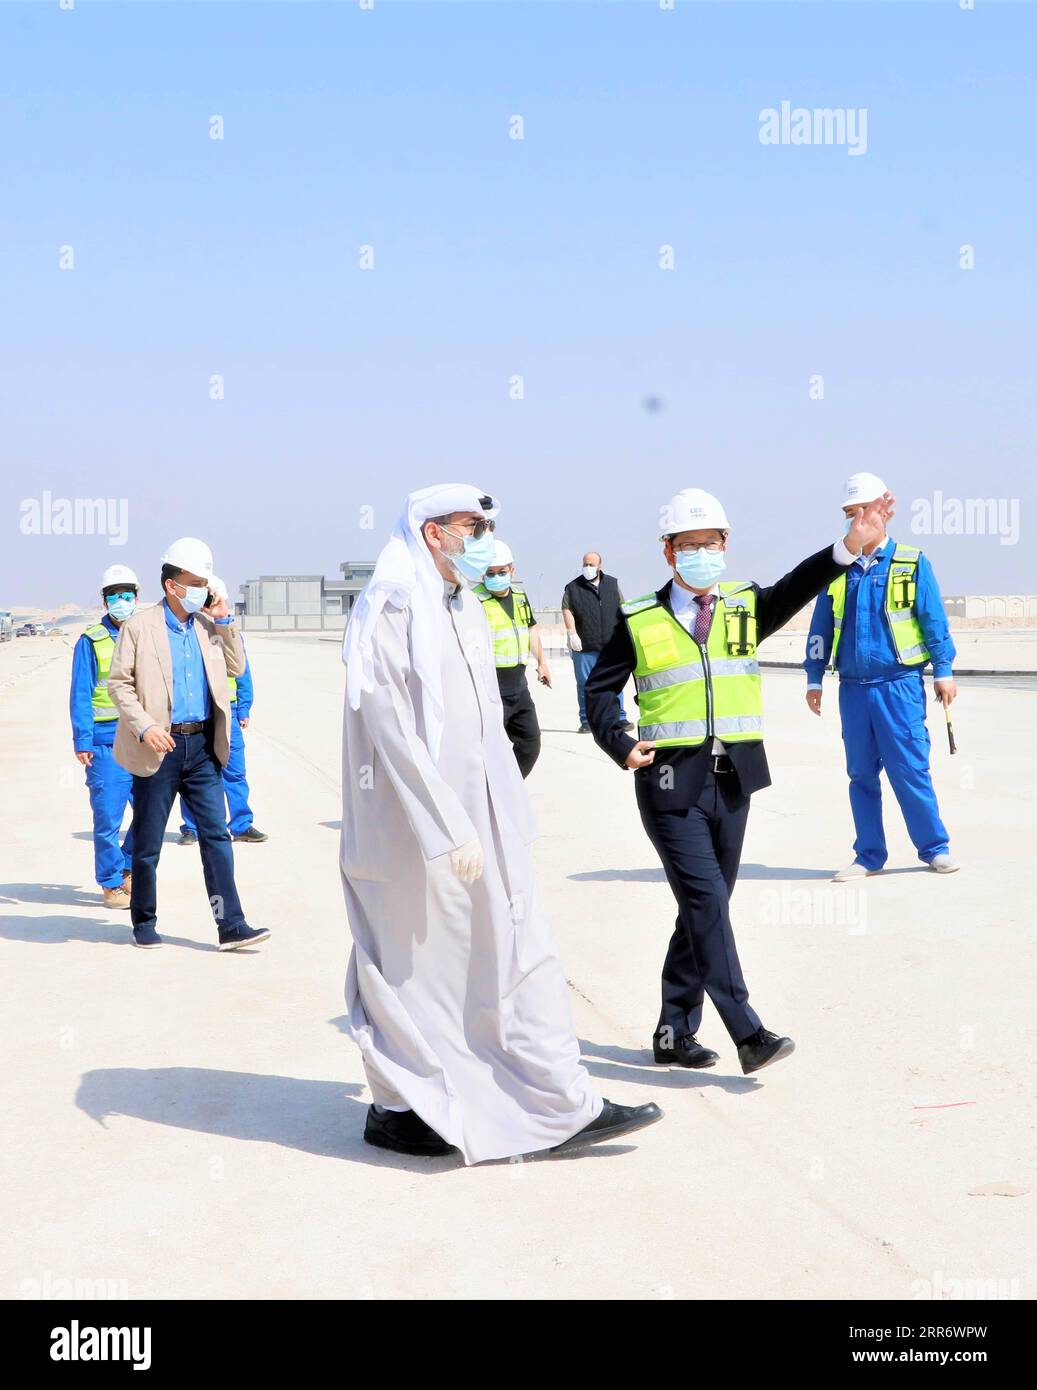 210302 -- JAHRA GOVERNORATE, March 2, 2021 -- Representatives of China Gezhouba Group Corporation CGGC and the Kuwaiti side inspect the construction site of a CGGC project in a desert of Jahra Governorate, Kuwait, March 2, 2021. China Gezhouba Group Corporation CGGC, affiliated to China Energy Engineering Group Co., Ltd., handed over on Tuesday the second batch of its housing infrastructure project to the Kuwaiti side, marking the handover of the main works of the project. Photo by Liu Lianghaoyue/Xinhua KUWAIT-JAHRA GOVERNORATE-CHINESE COMPANY-PROJECT-HANDOVER NiexYunpeng PUBLICATIONxNOTxINxC Stock Photo